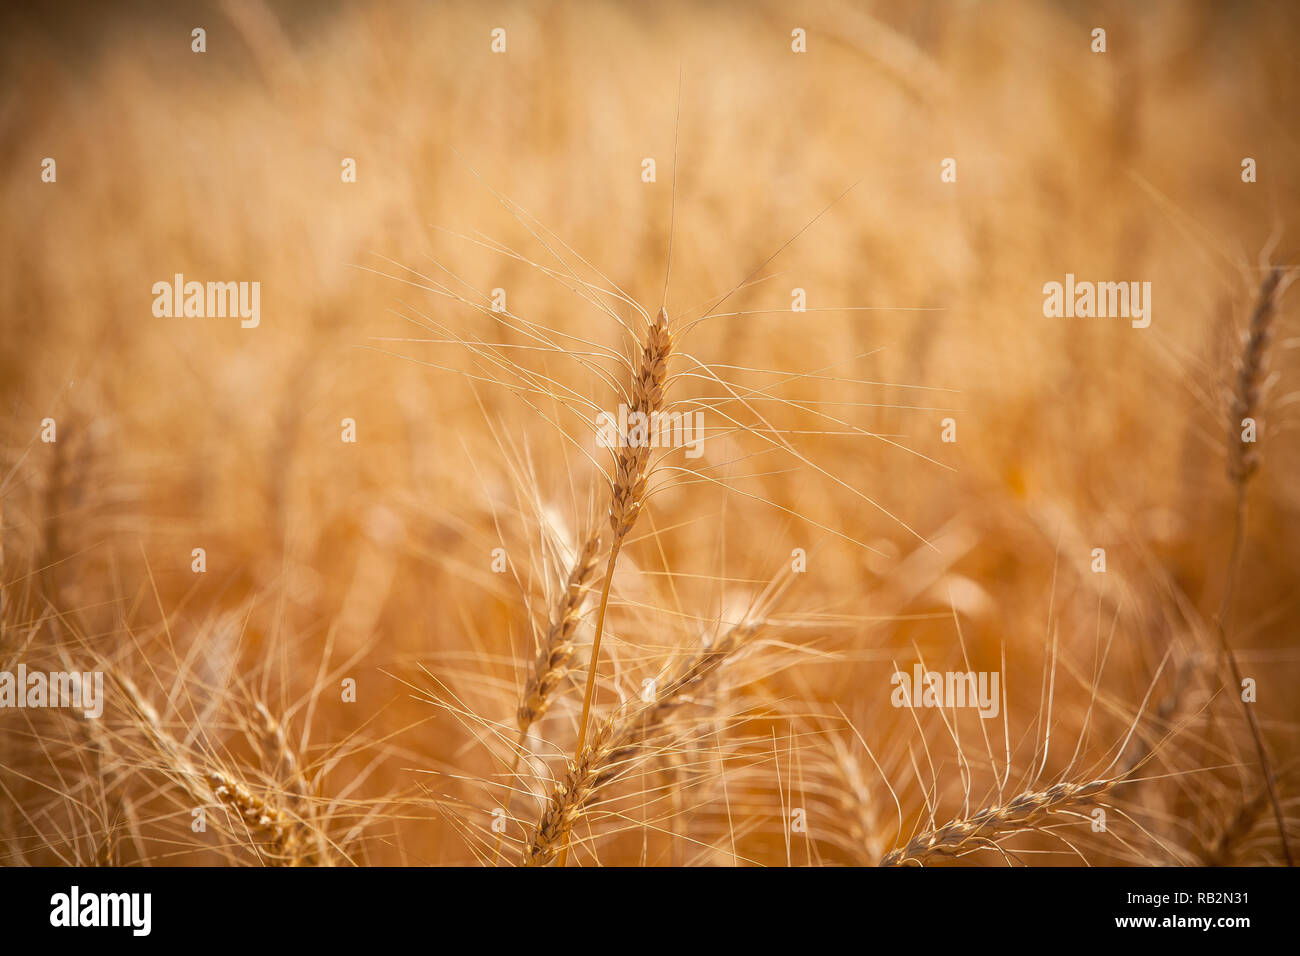 Golden barley field closer, Agriculture farm and farming concept, banner Stock Photo